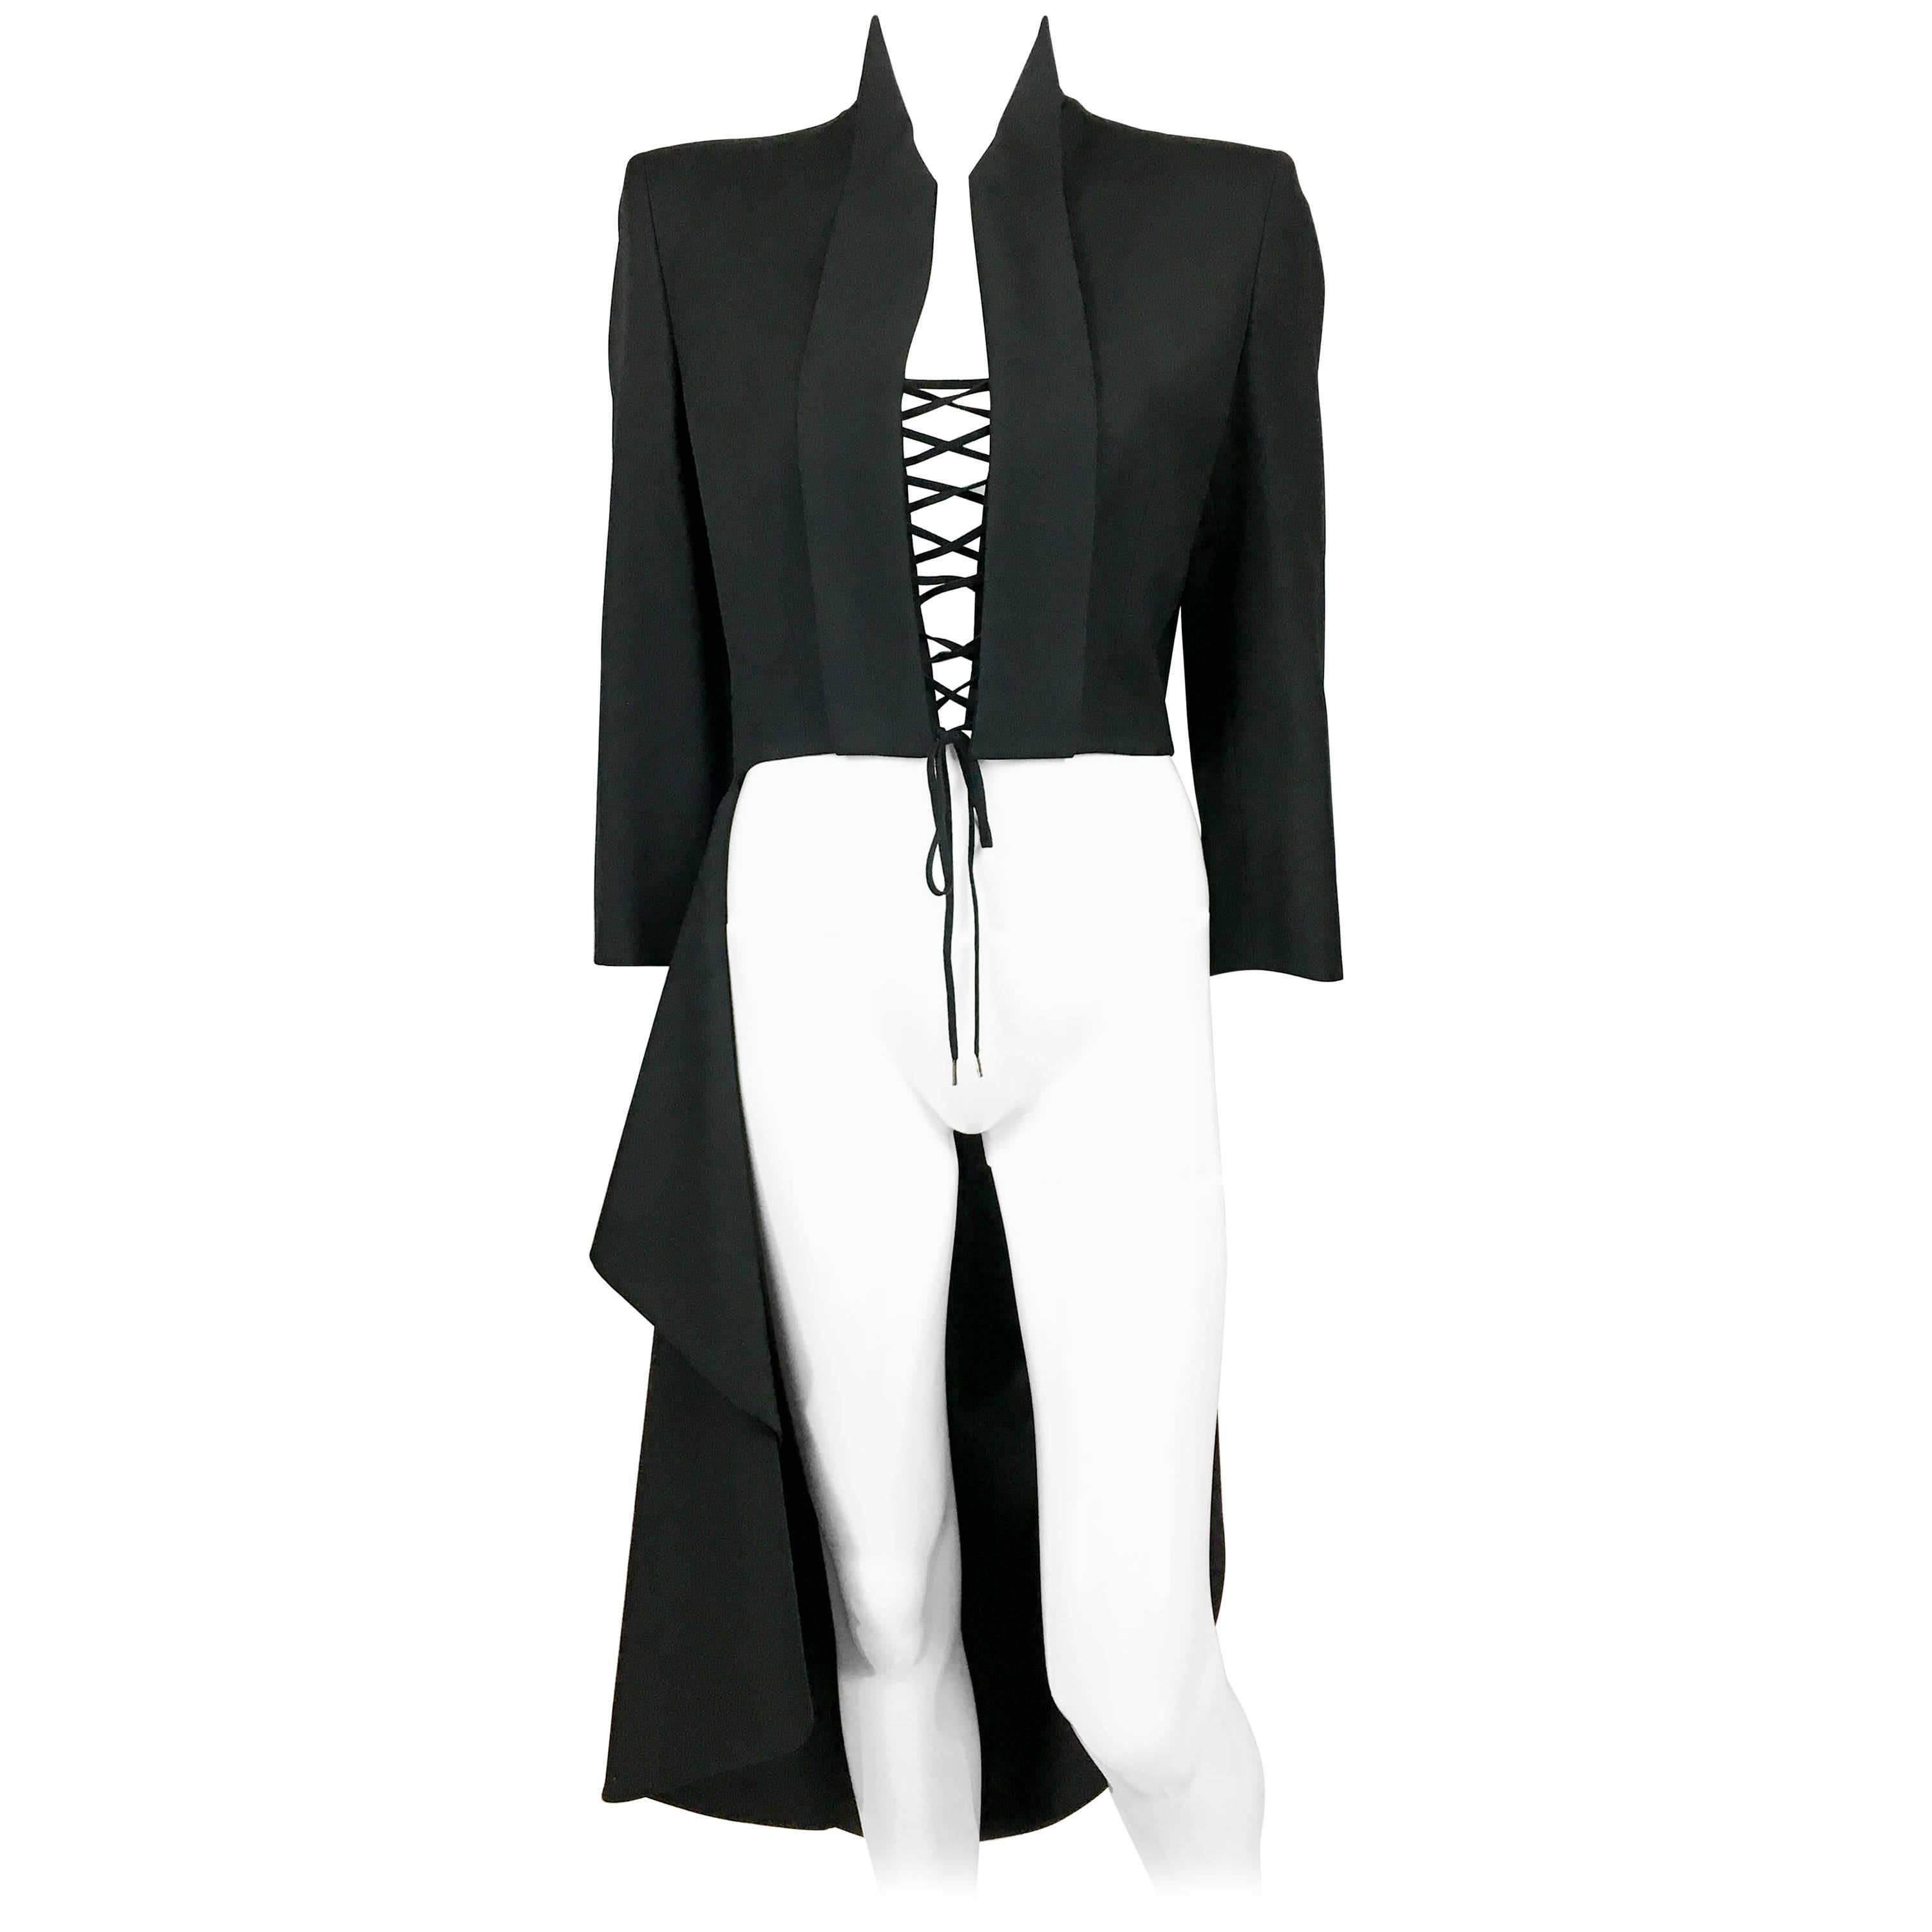 Alexander McQueen "The Dance of the Twisted Bull" Runway Matador Jacket, 2002  For Sale